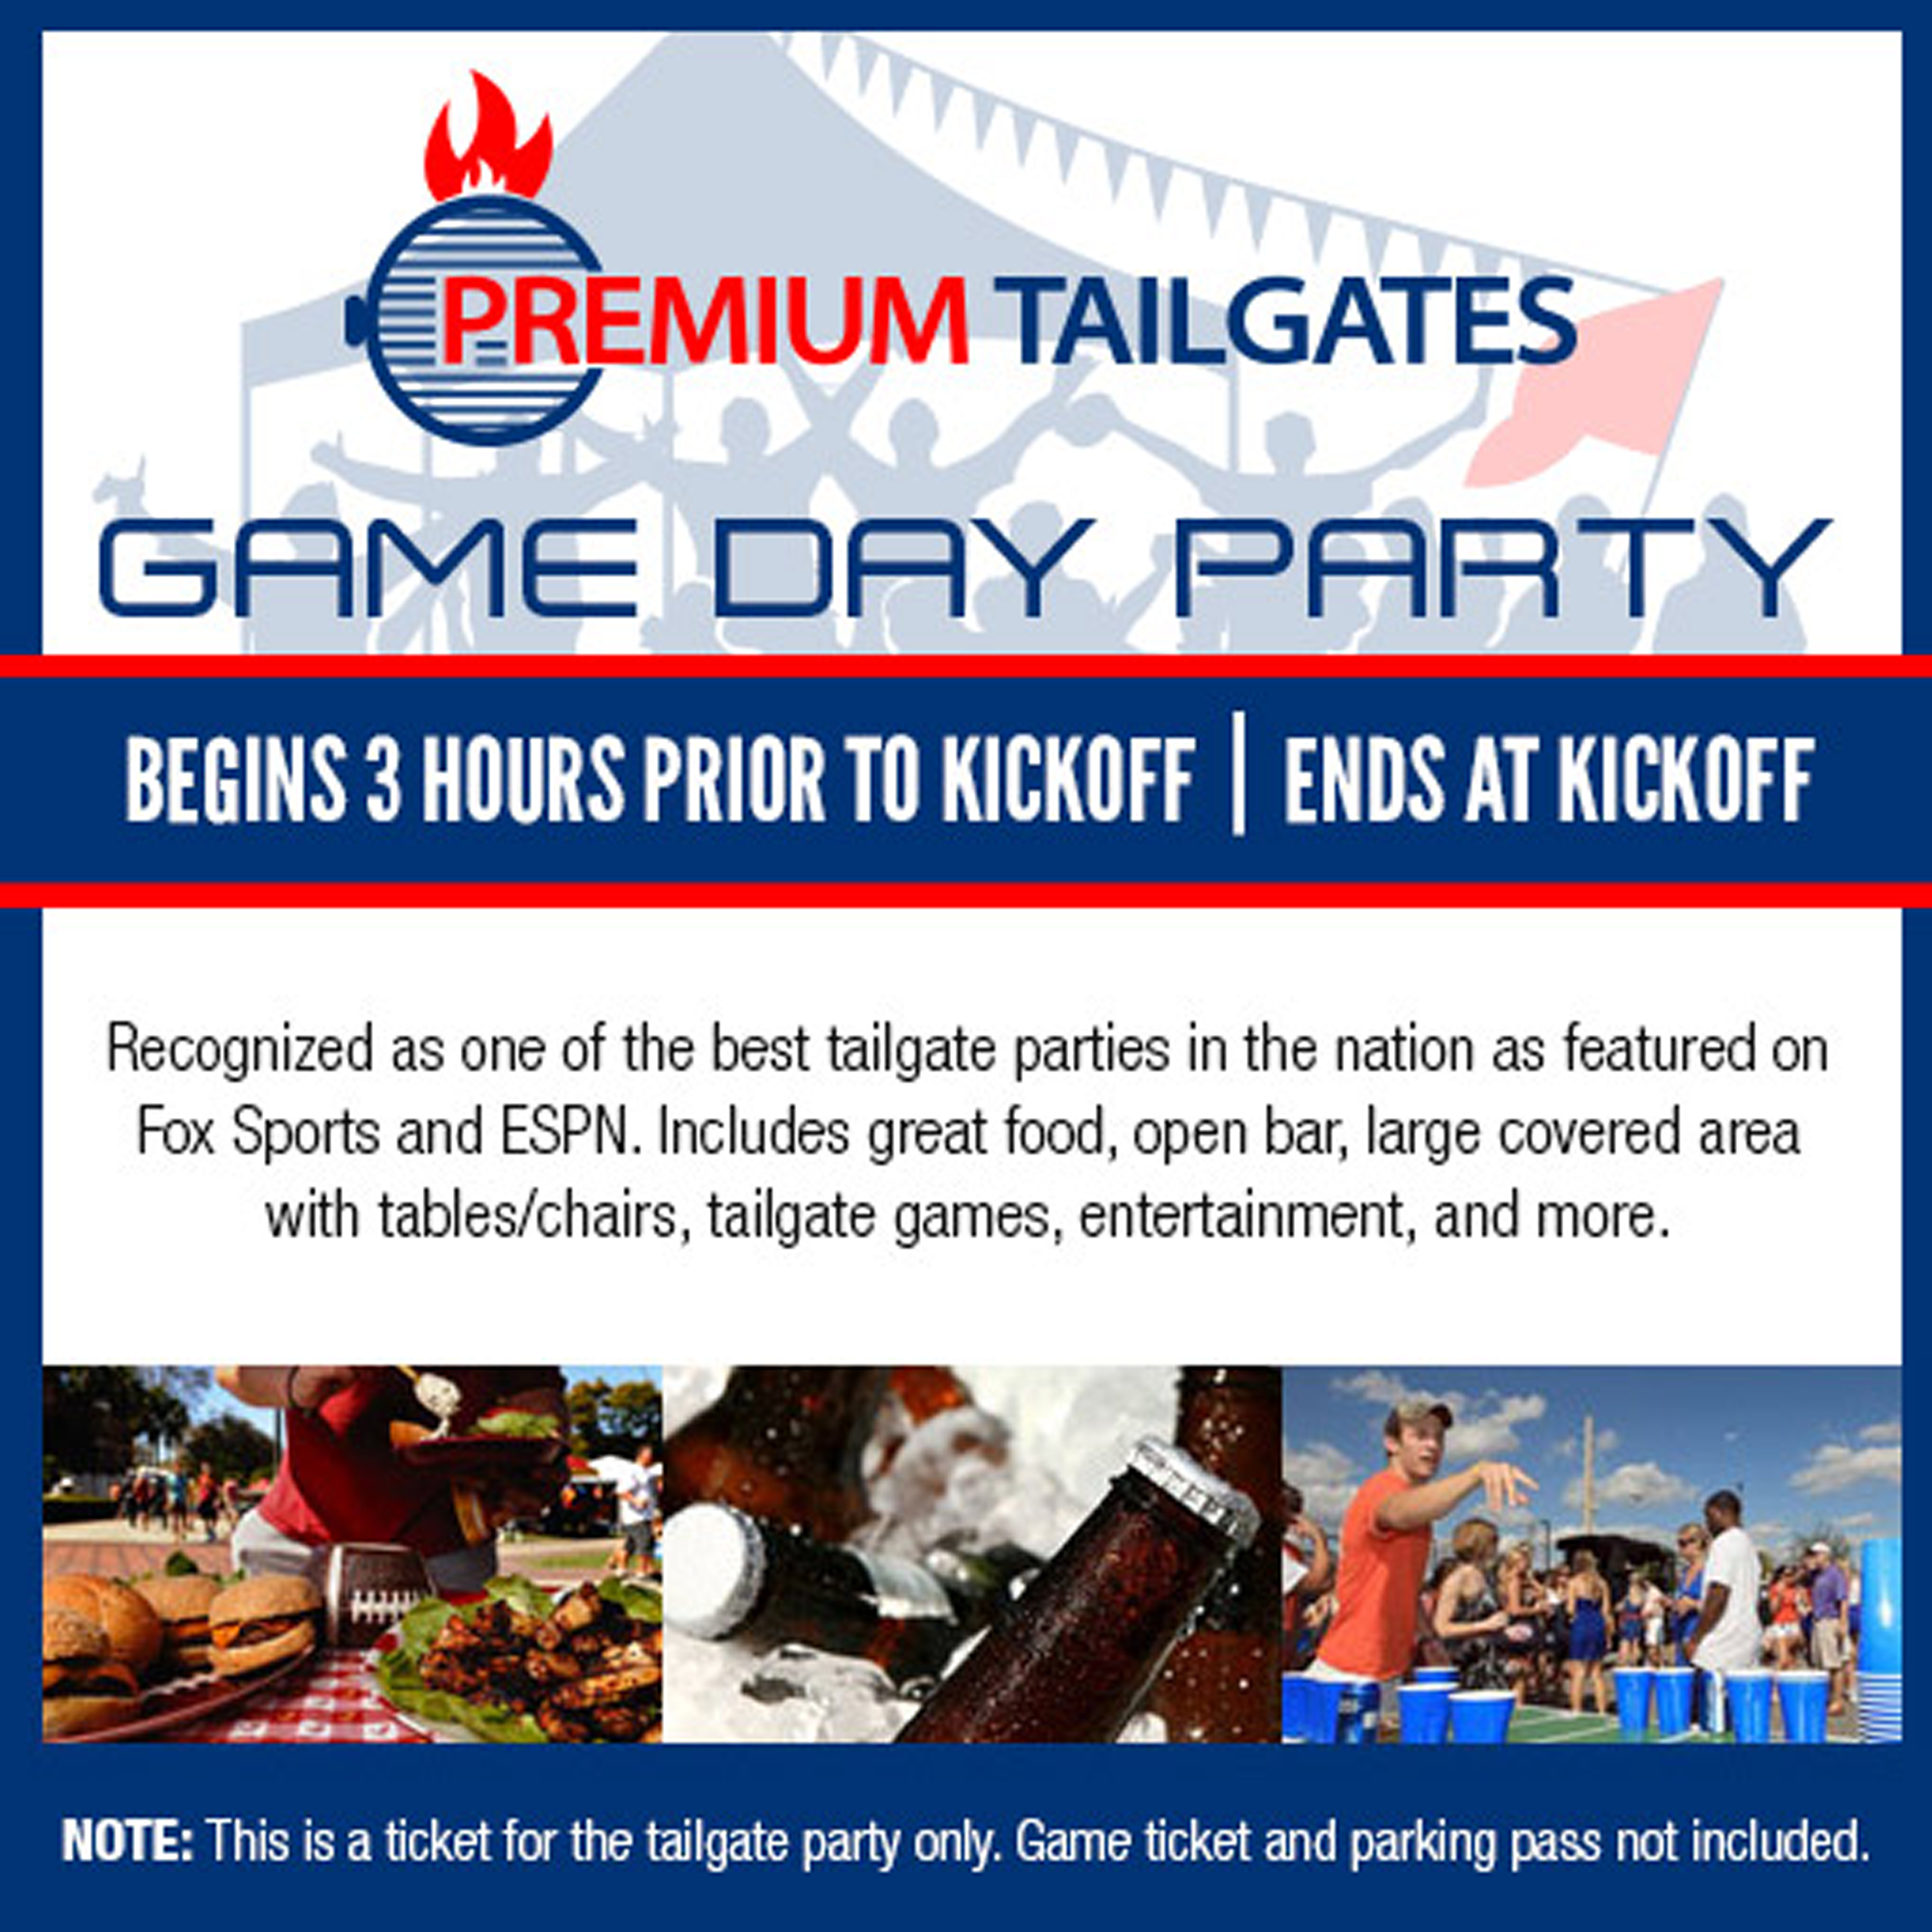 Ticket & Tailgate Package